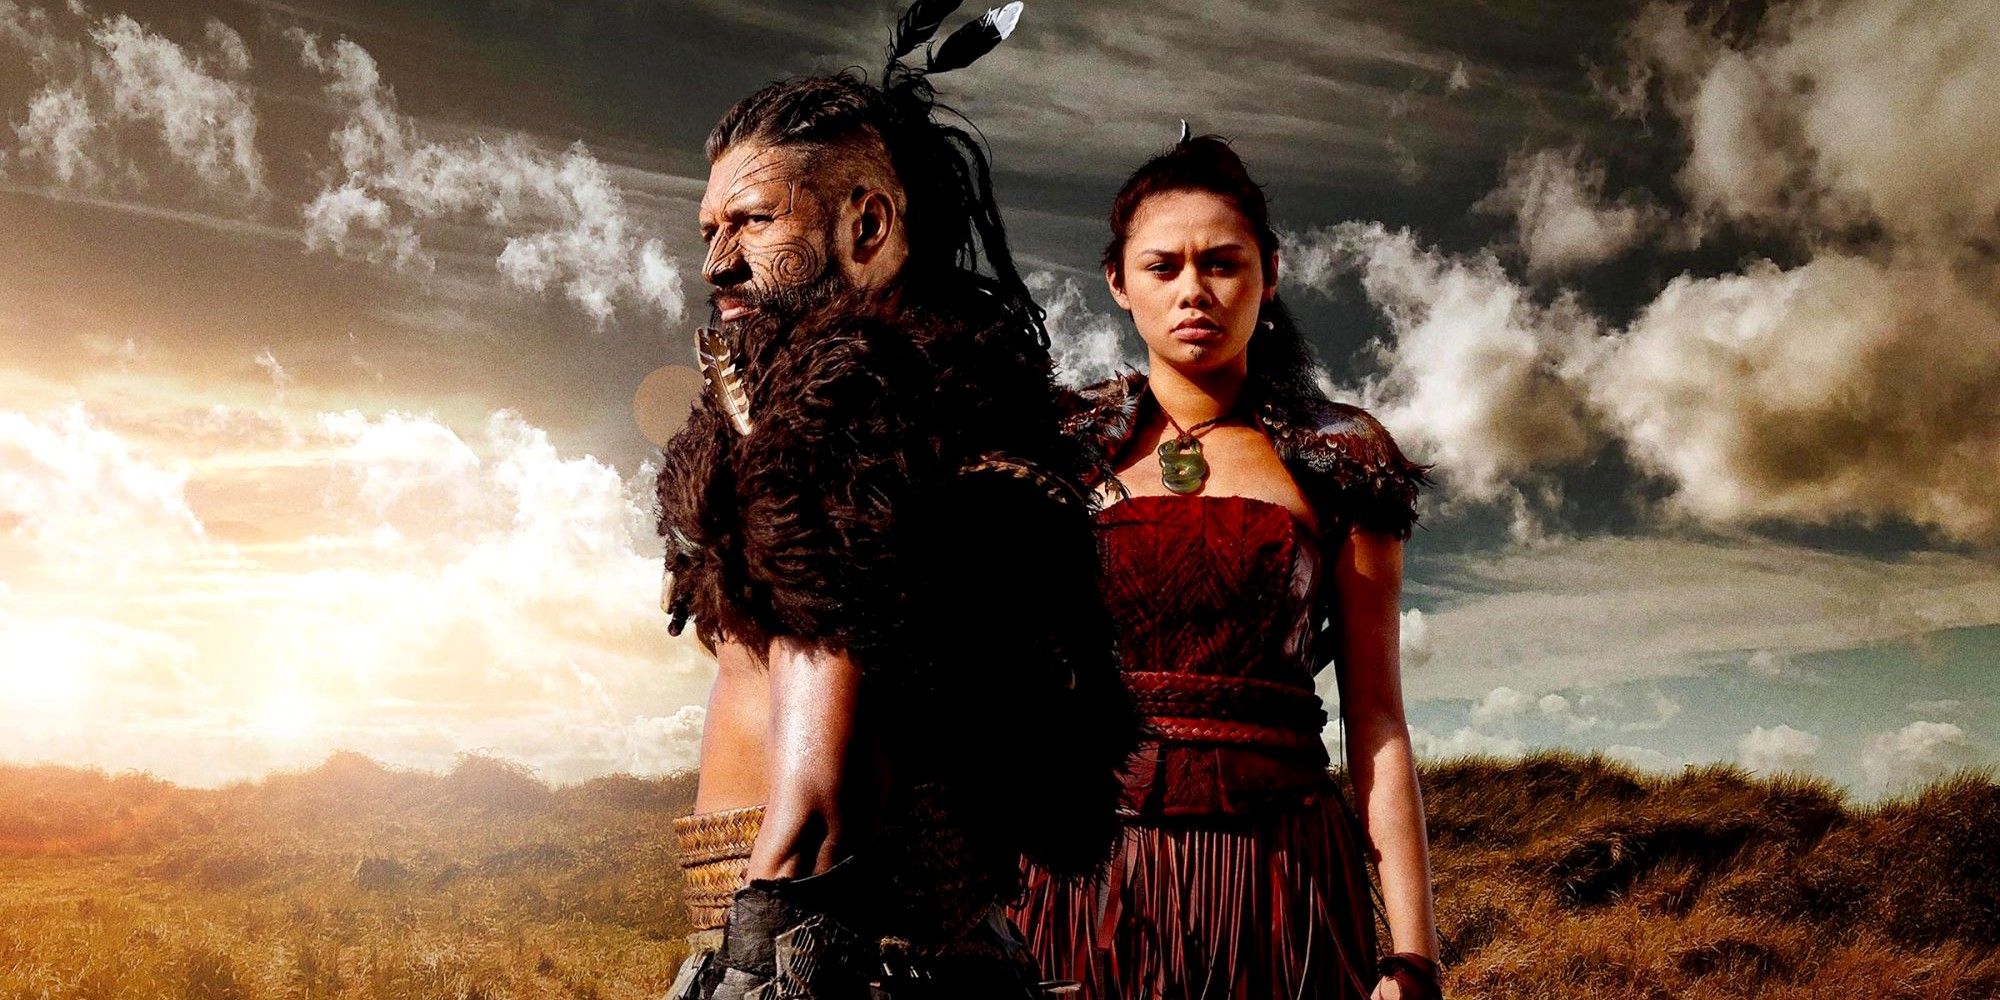 Waka and Mehe in Dead Lands